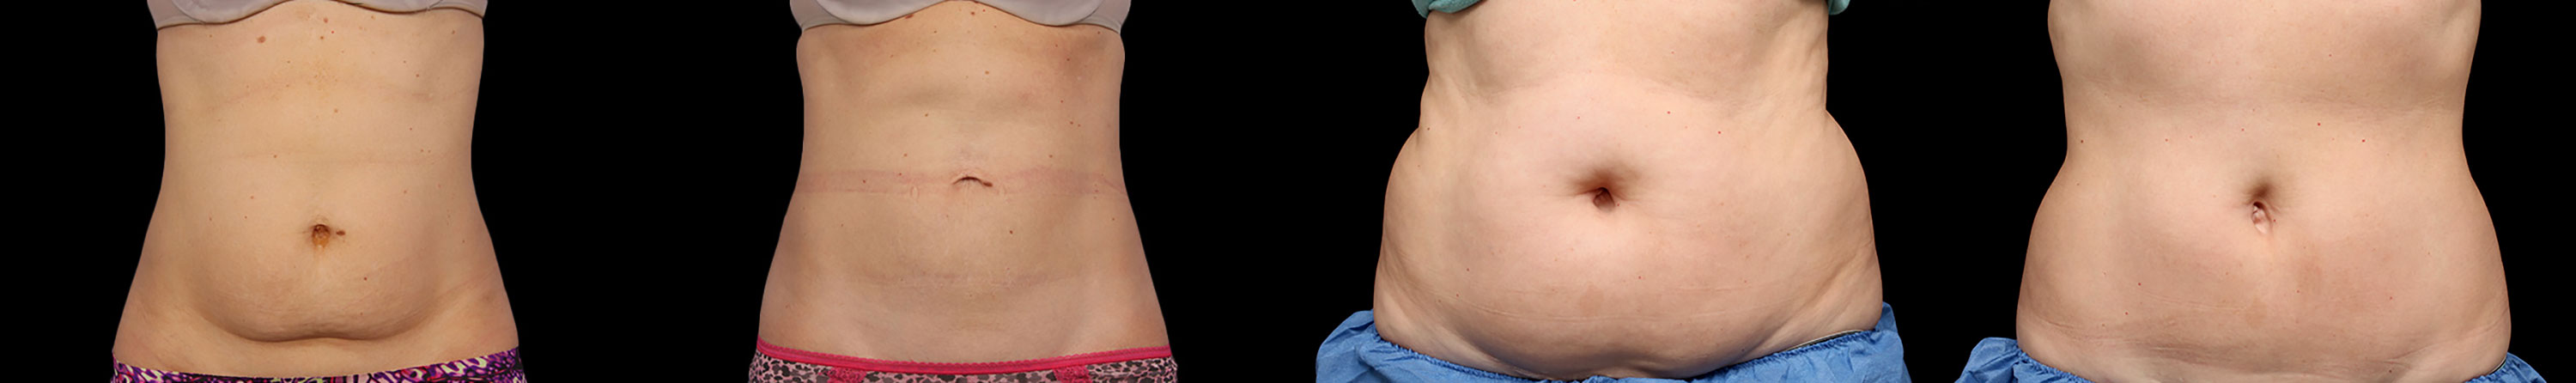 CoolSculpting Before And After Photos